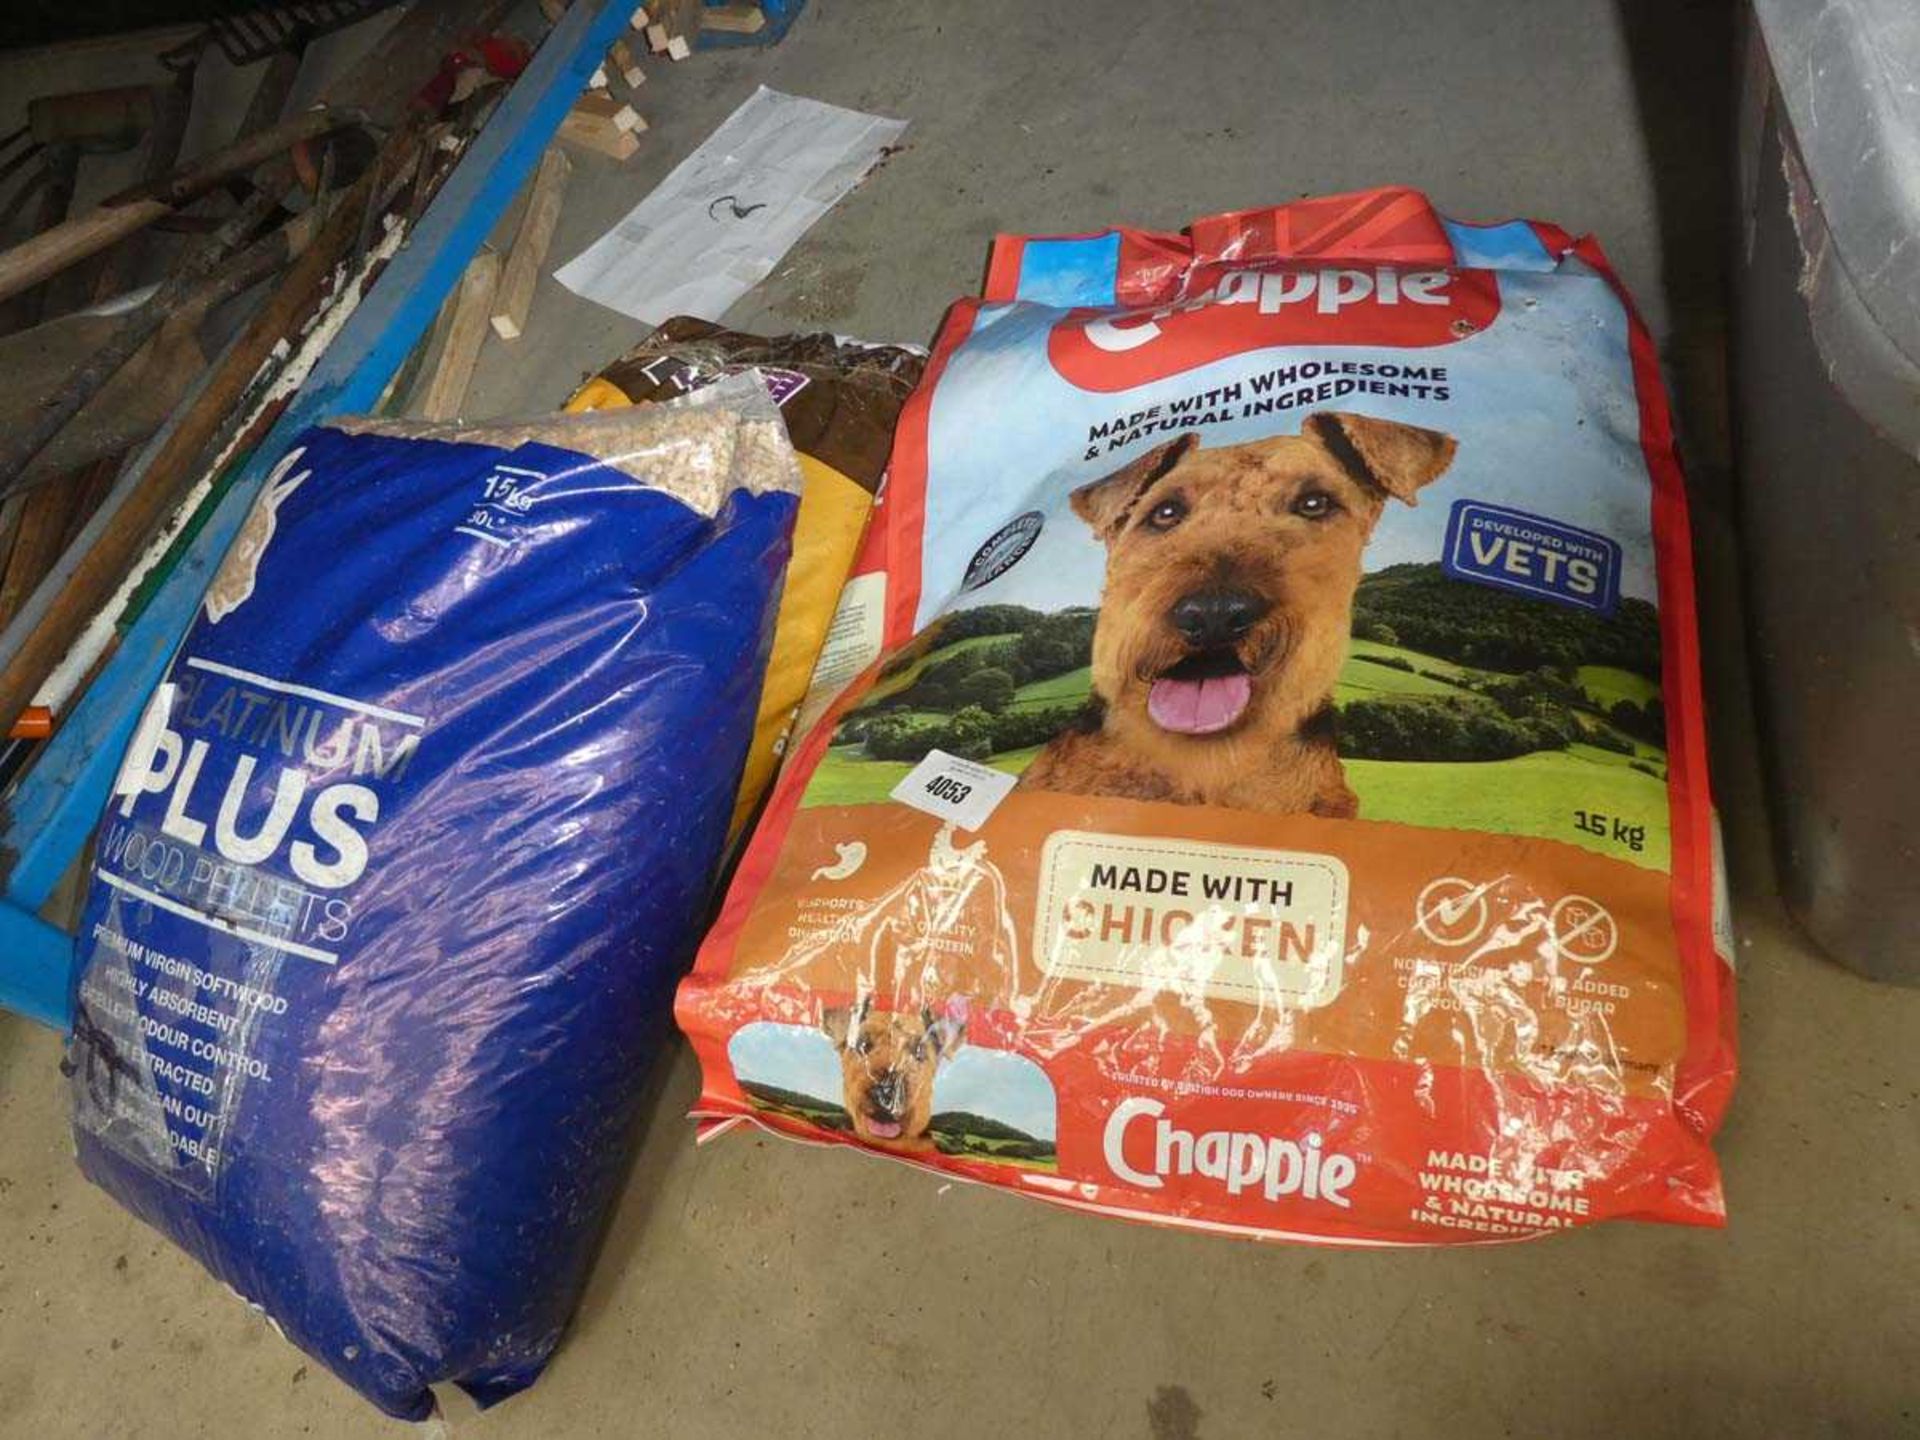 +VAT Bag of Chappie dog food, some wood pellets and some play pit sand